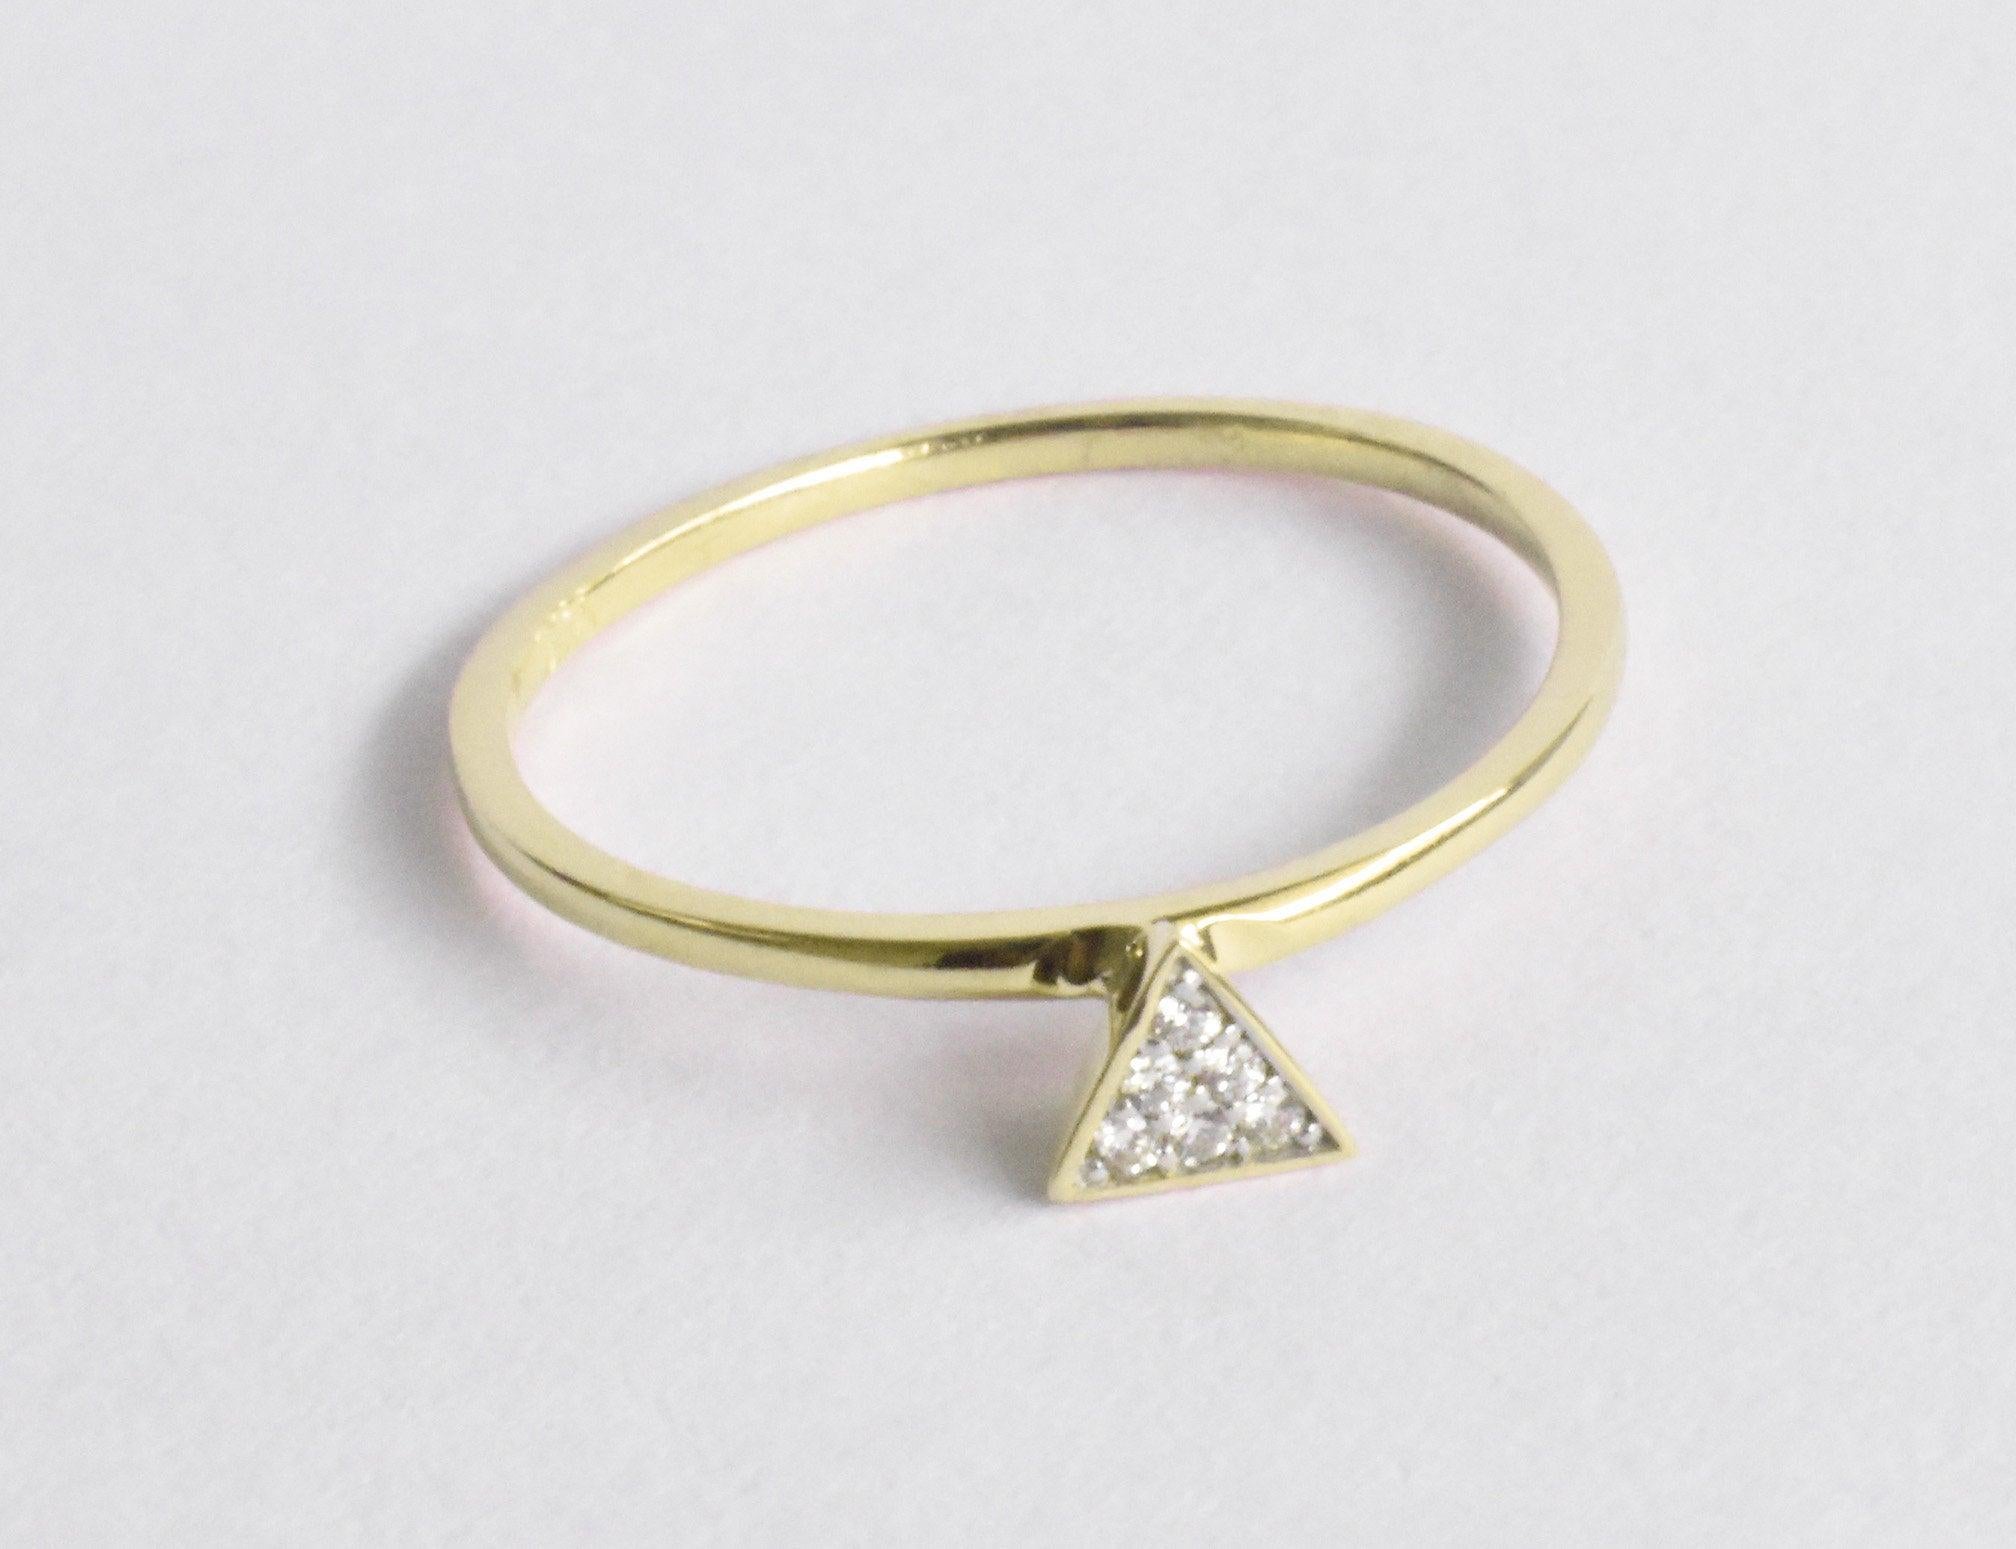 For Sale:  18k Gold Triangle Stacking Ring with White Pave Diamonds Minimalist Ring 3